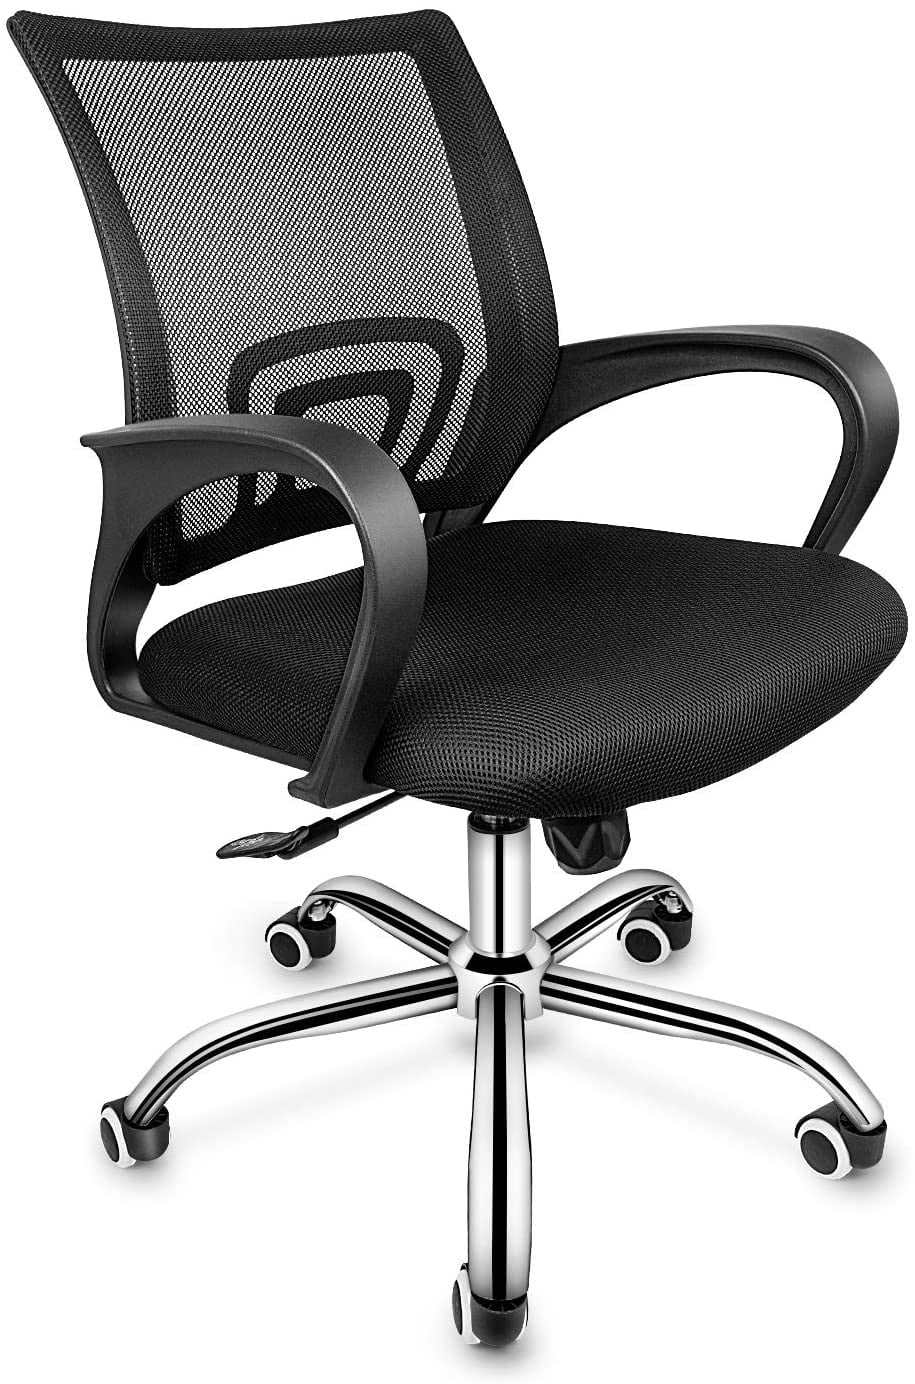 Simple Deluxe Task Office Chair Ergonomic Mesh Computer Chair Wheels and Arms